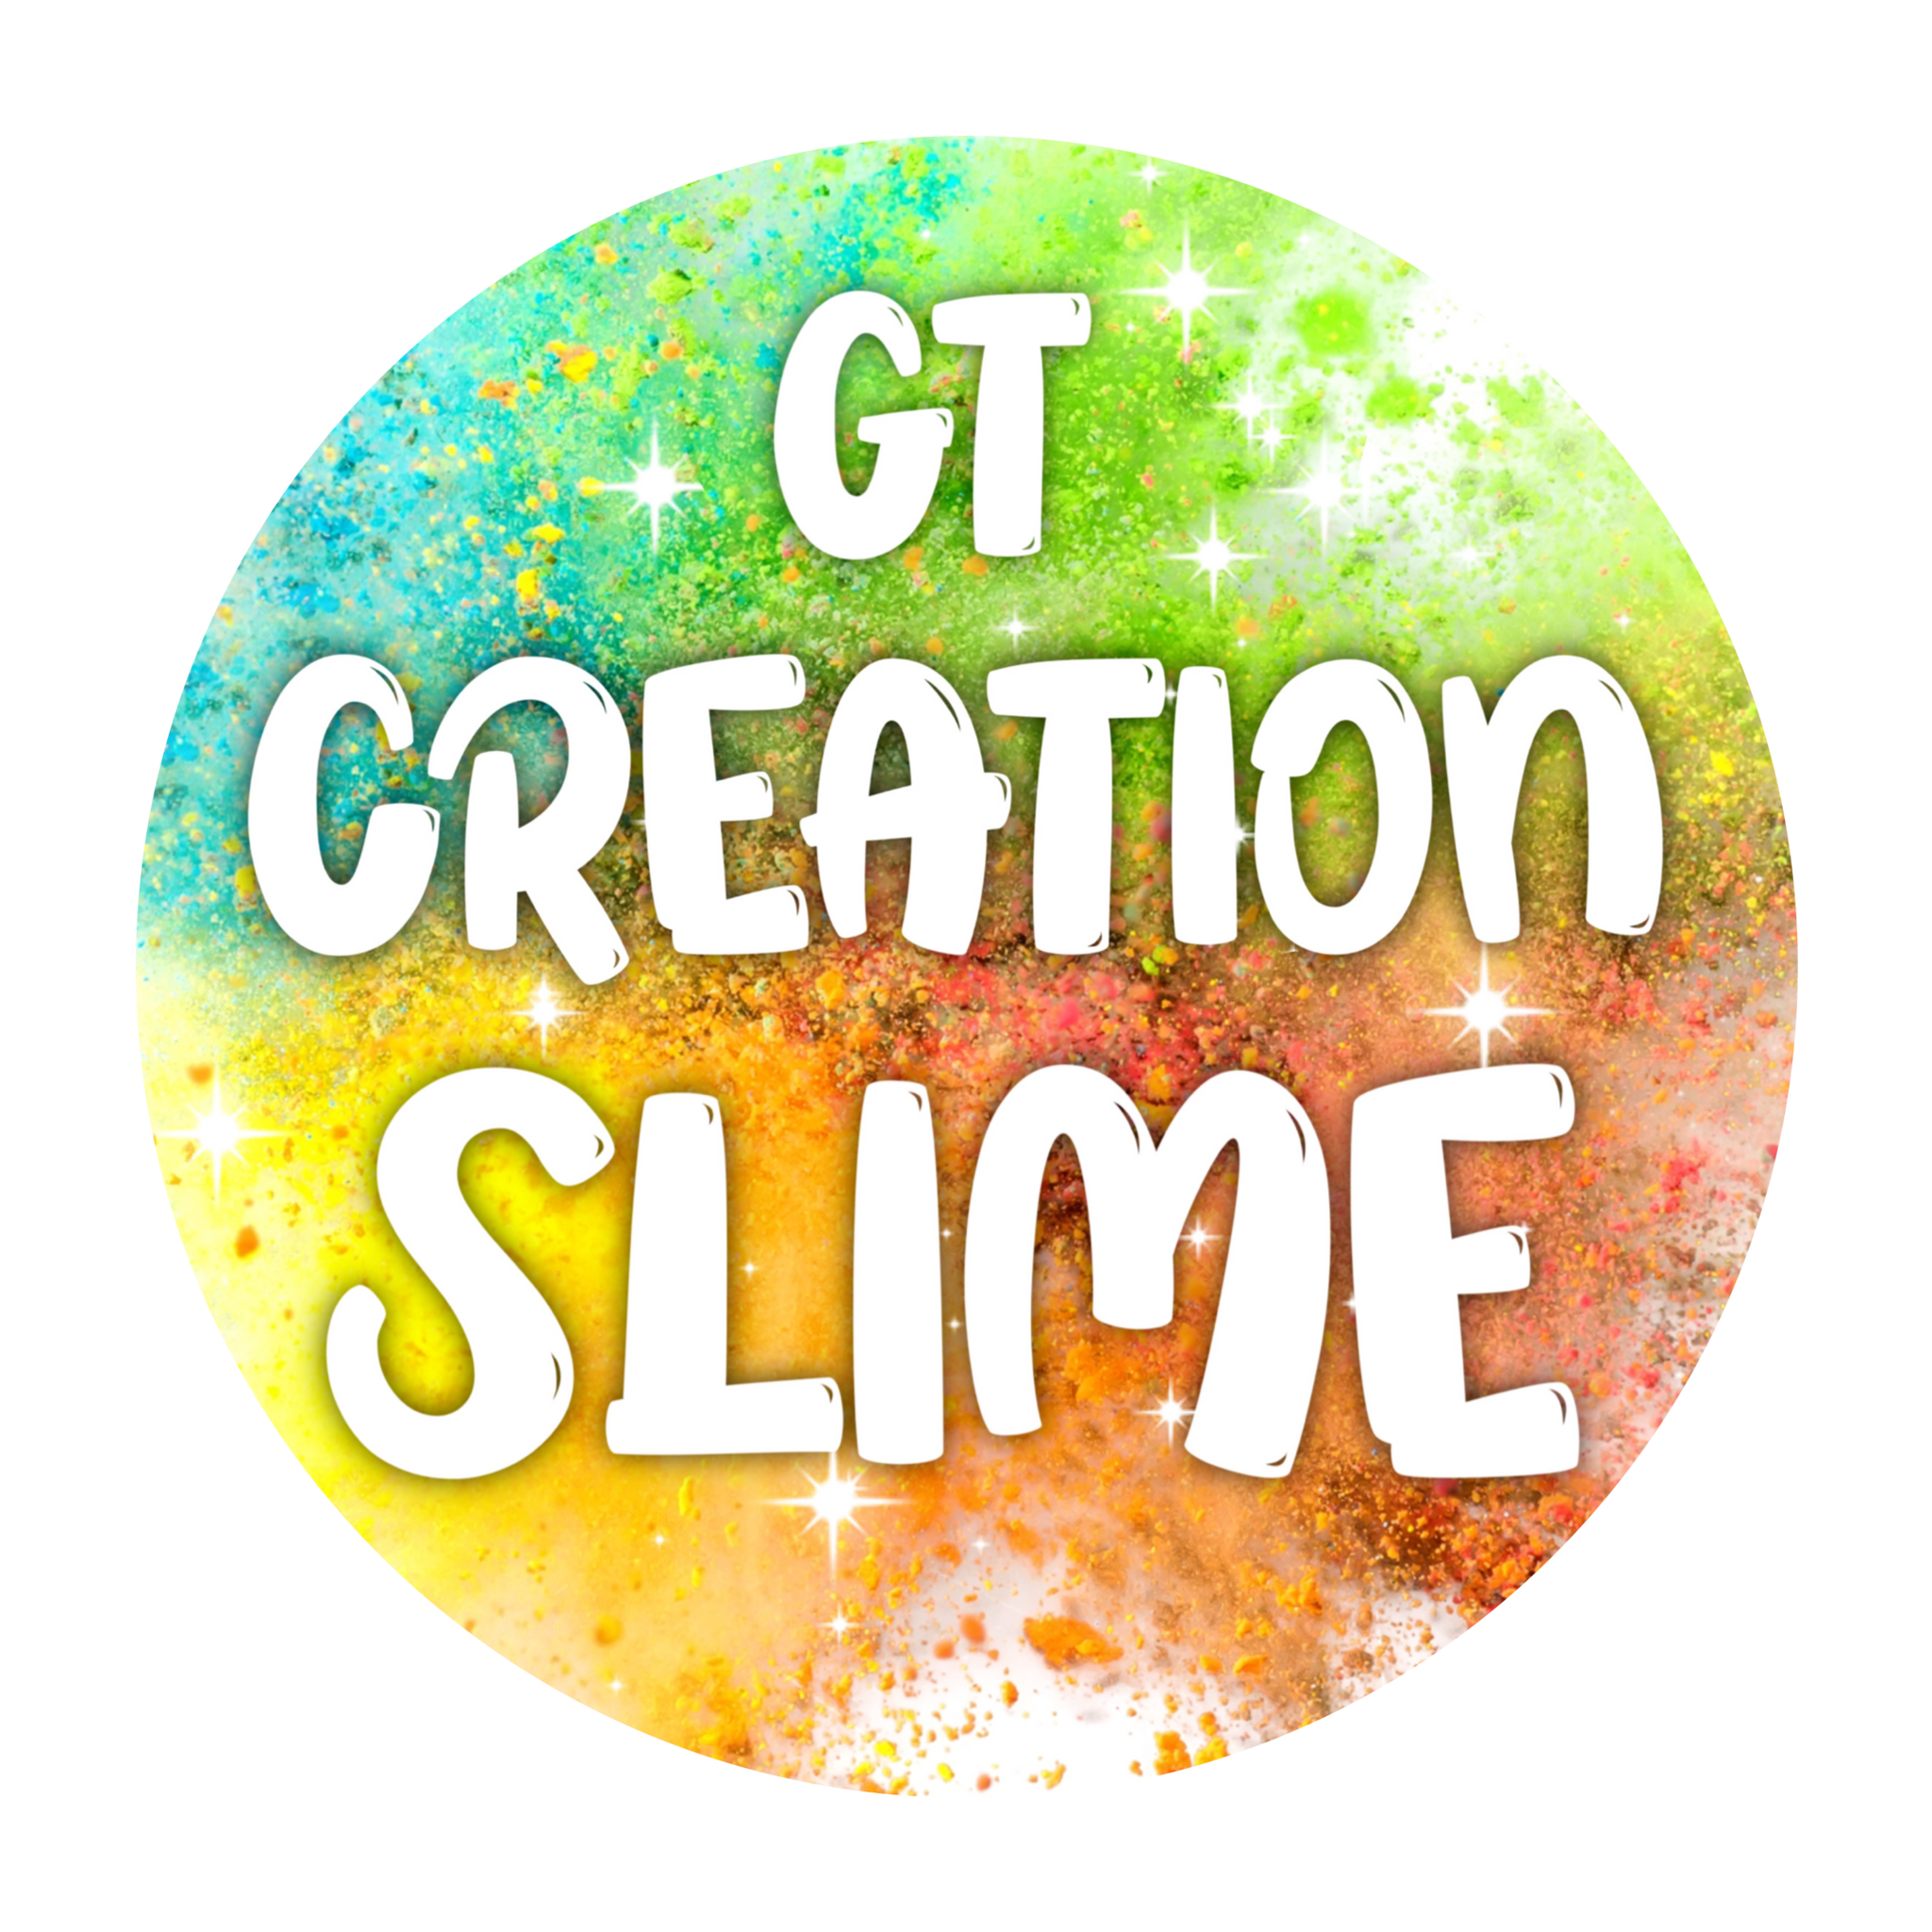 Slime Cotton Candy Dipped Waffle DIY Clay Slime, Scented Slime